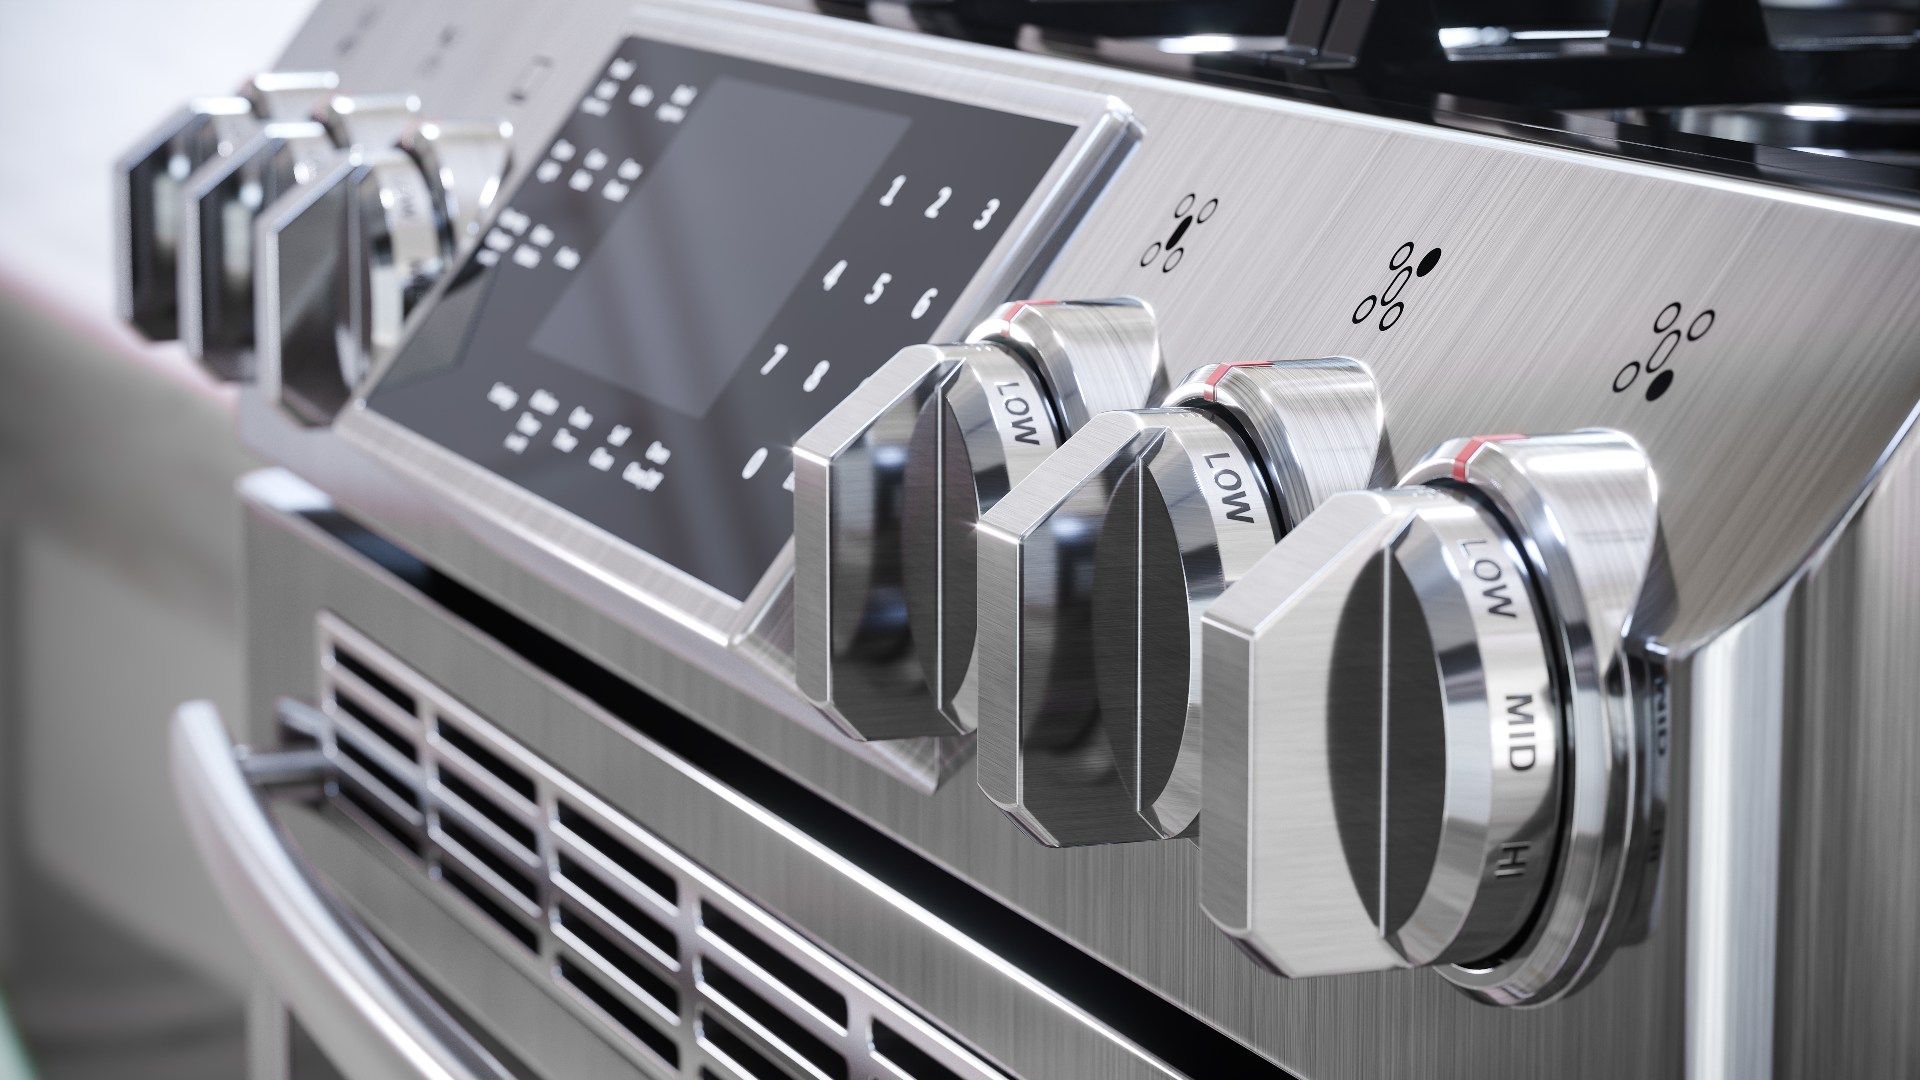 Close-up of the controls on a stainless steel gas range - Samsung gas oven range